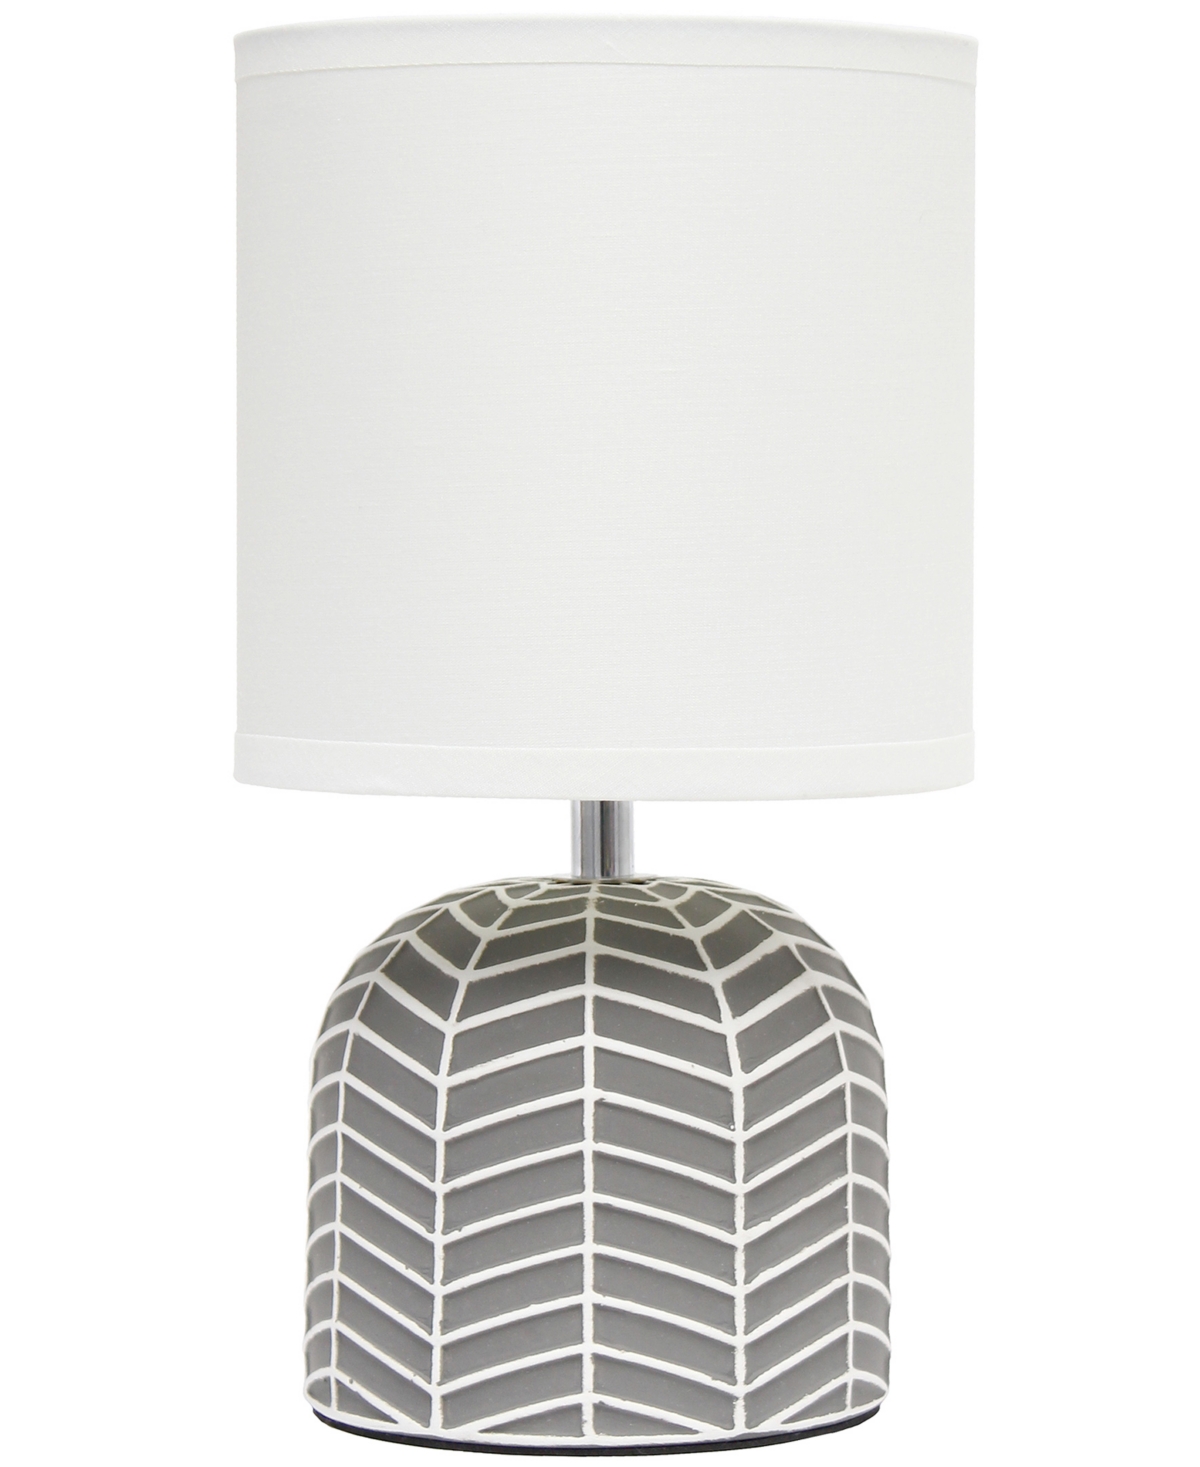 Shop Simple Designs 10.43" Petite Contemporary Webbed Waves Base Bedside Table Desk Lamp With White Fabric Drum Shade In Taupe